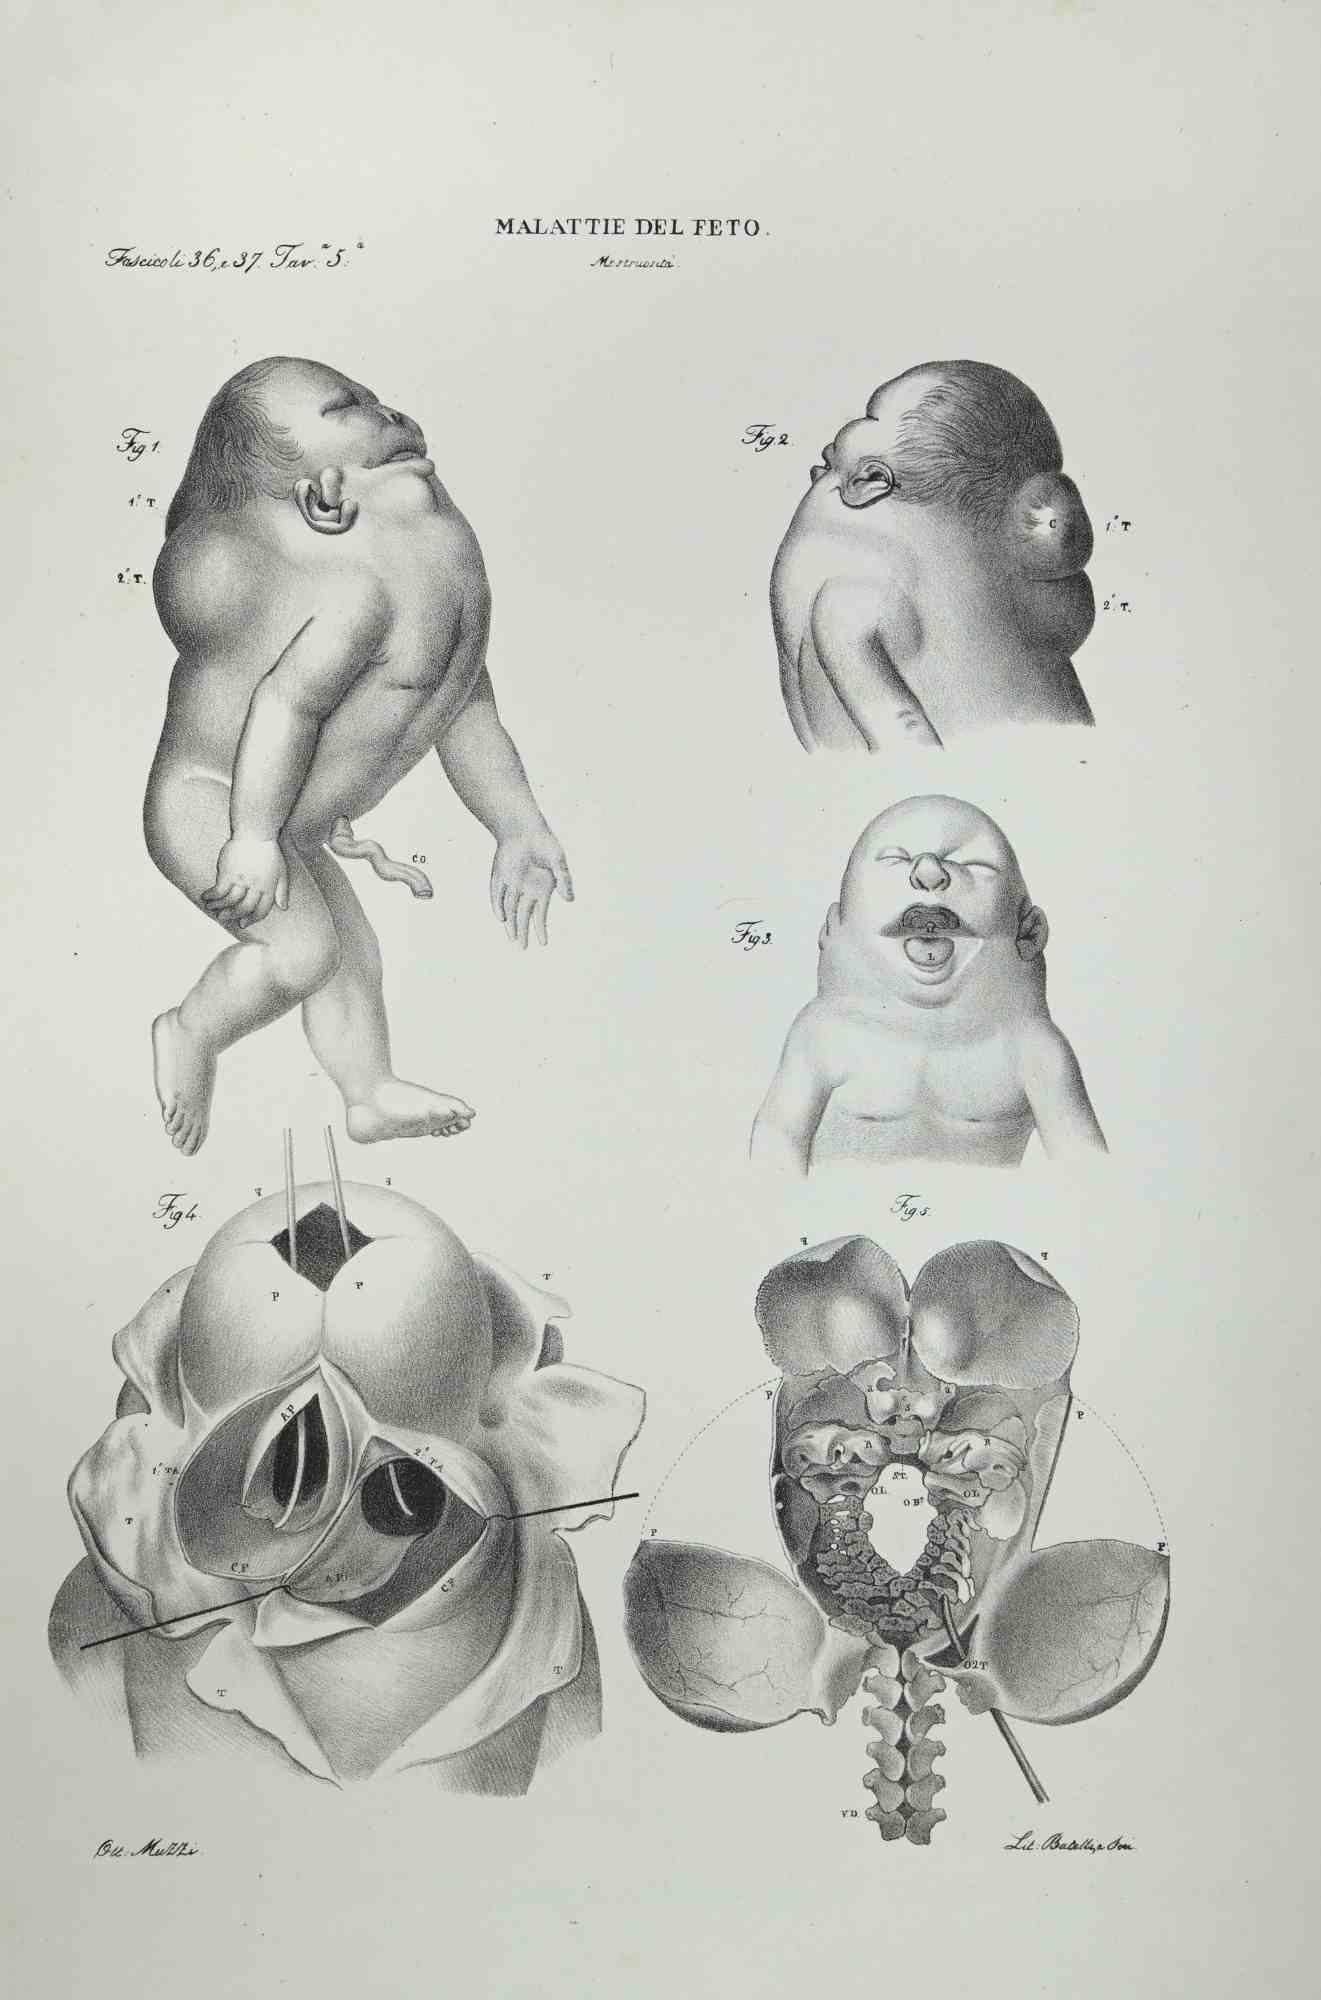 Diseases of the Fetus is a lithograph hand colored by Ottavio Muzzi for the edition of Antoine Chazal,Human Anatomy, Printers Batelli and Ridolfi, realized in 1843.

Signed on plate on the lower left margin.